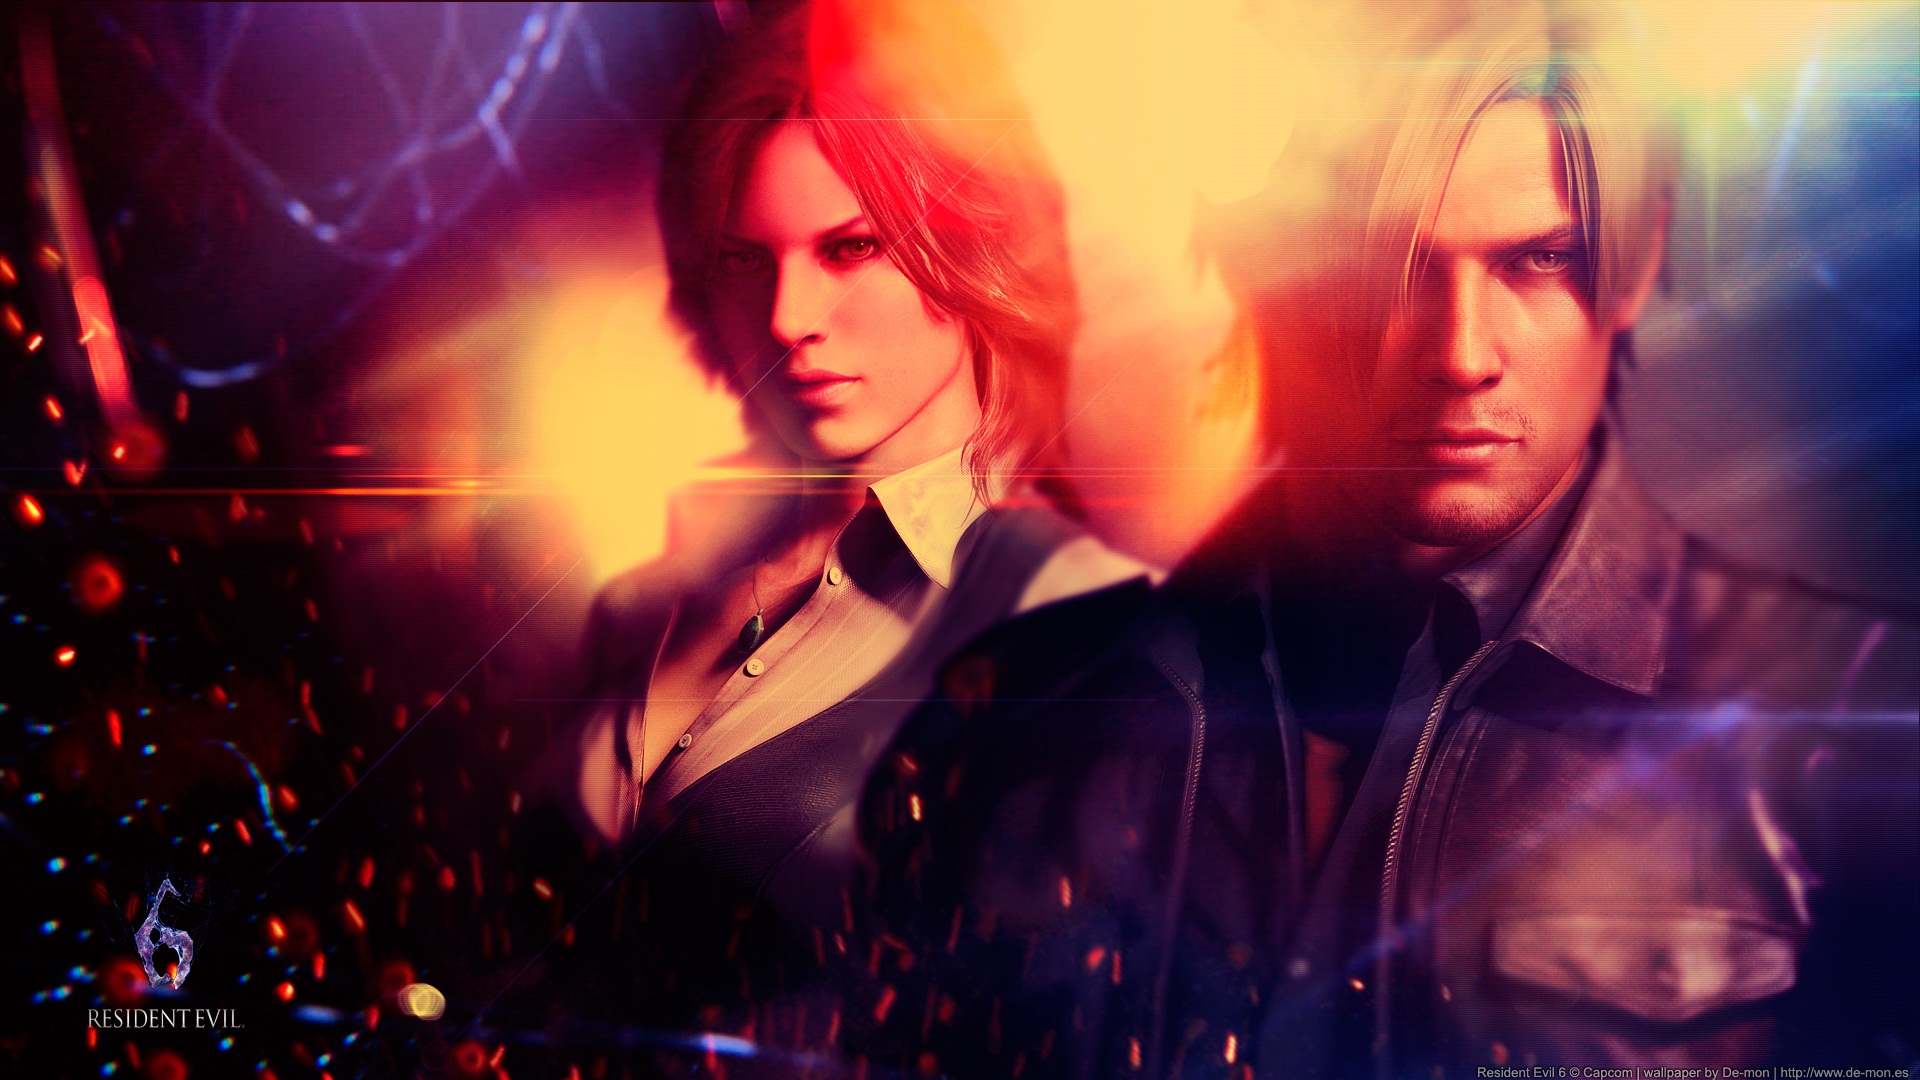 Resident Evil 6 HD game wallpapers #8 - 1920x1080